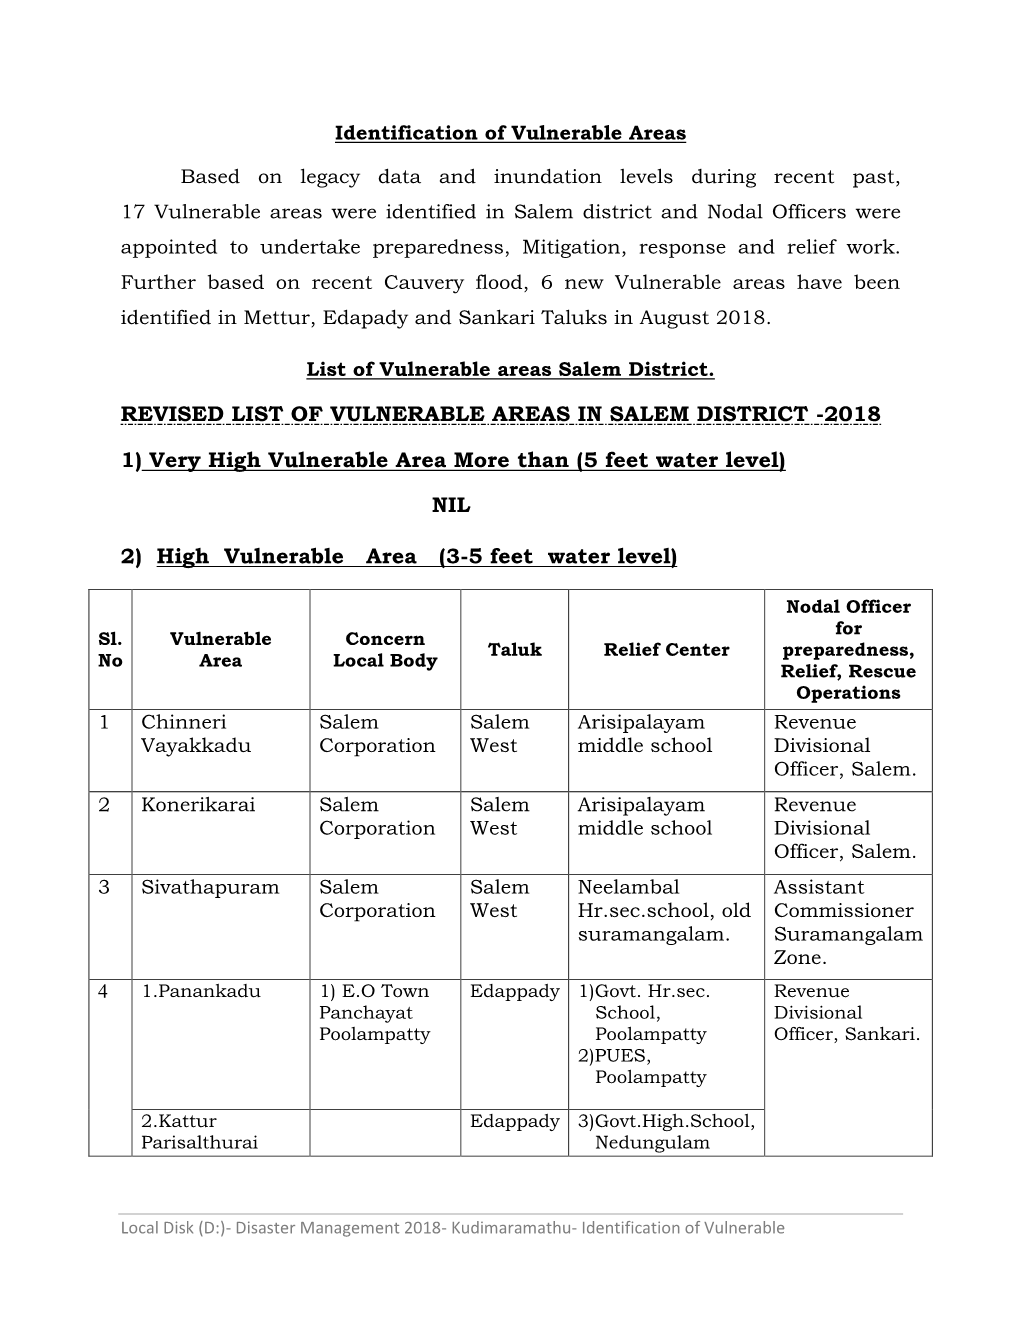 Revised List of Vulnerable Areas in Salem District -2018